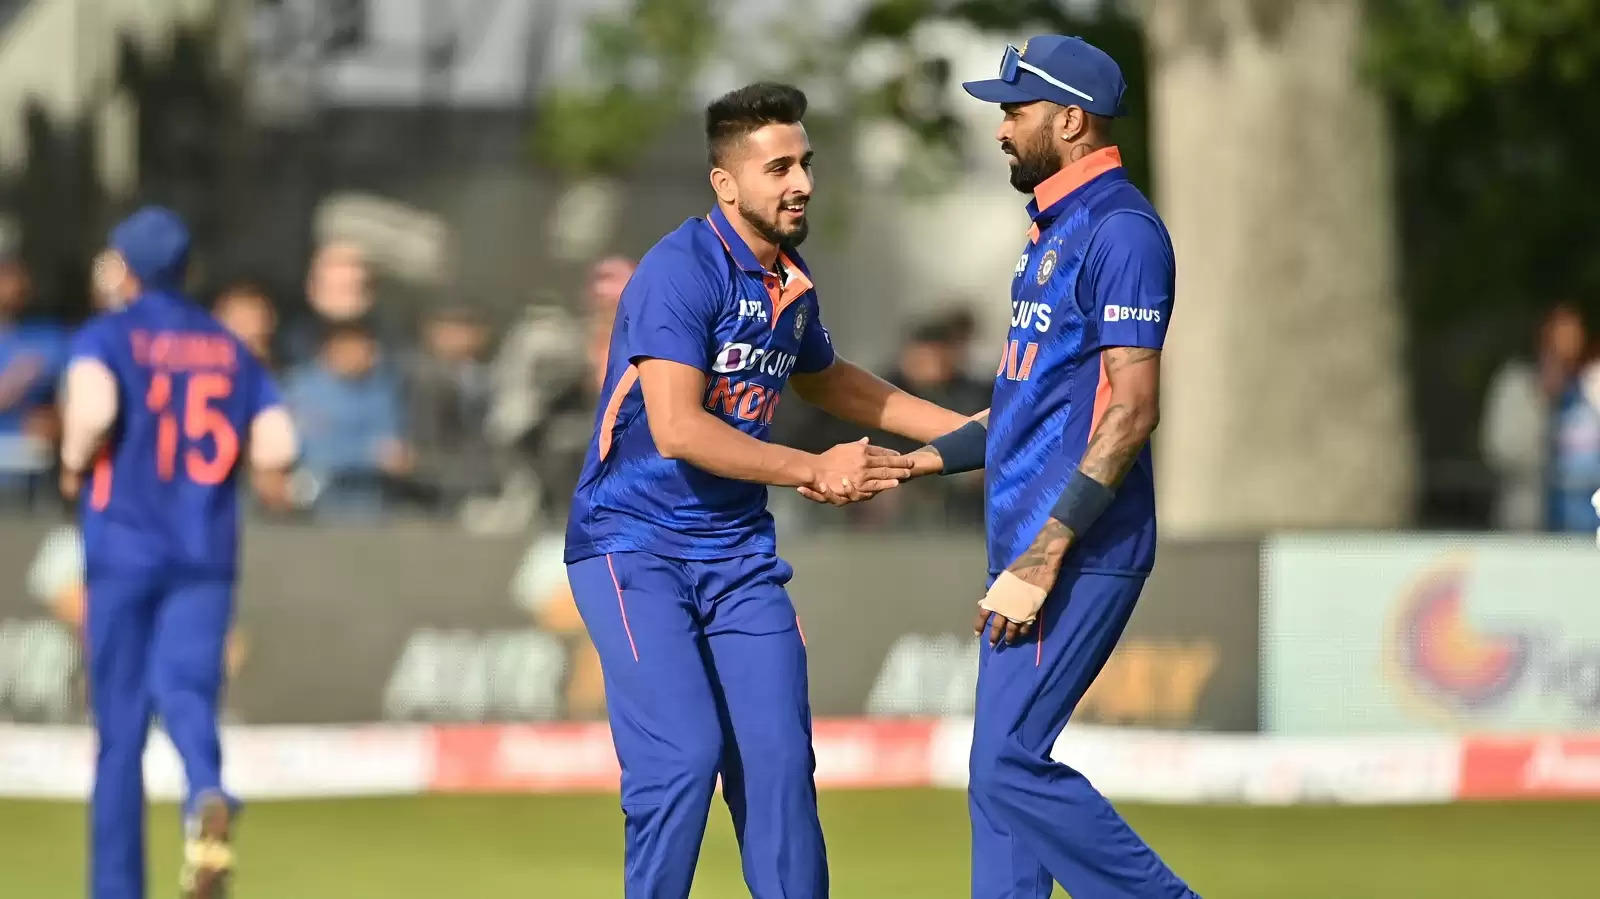 Derbyshire vs India 1st T20 warm-up match 2022 Live Streaming Details When and Where to Watch DER vs IND warm-up T20 LIVE in India and in the UK, Squads, Schedule, Date and